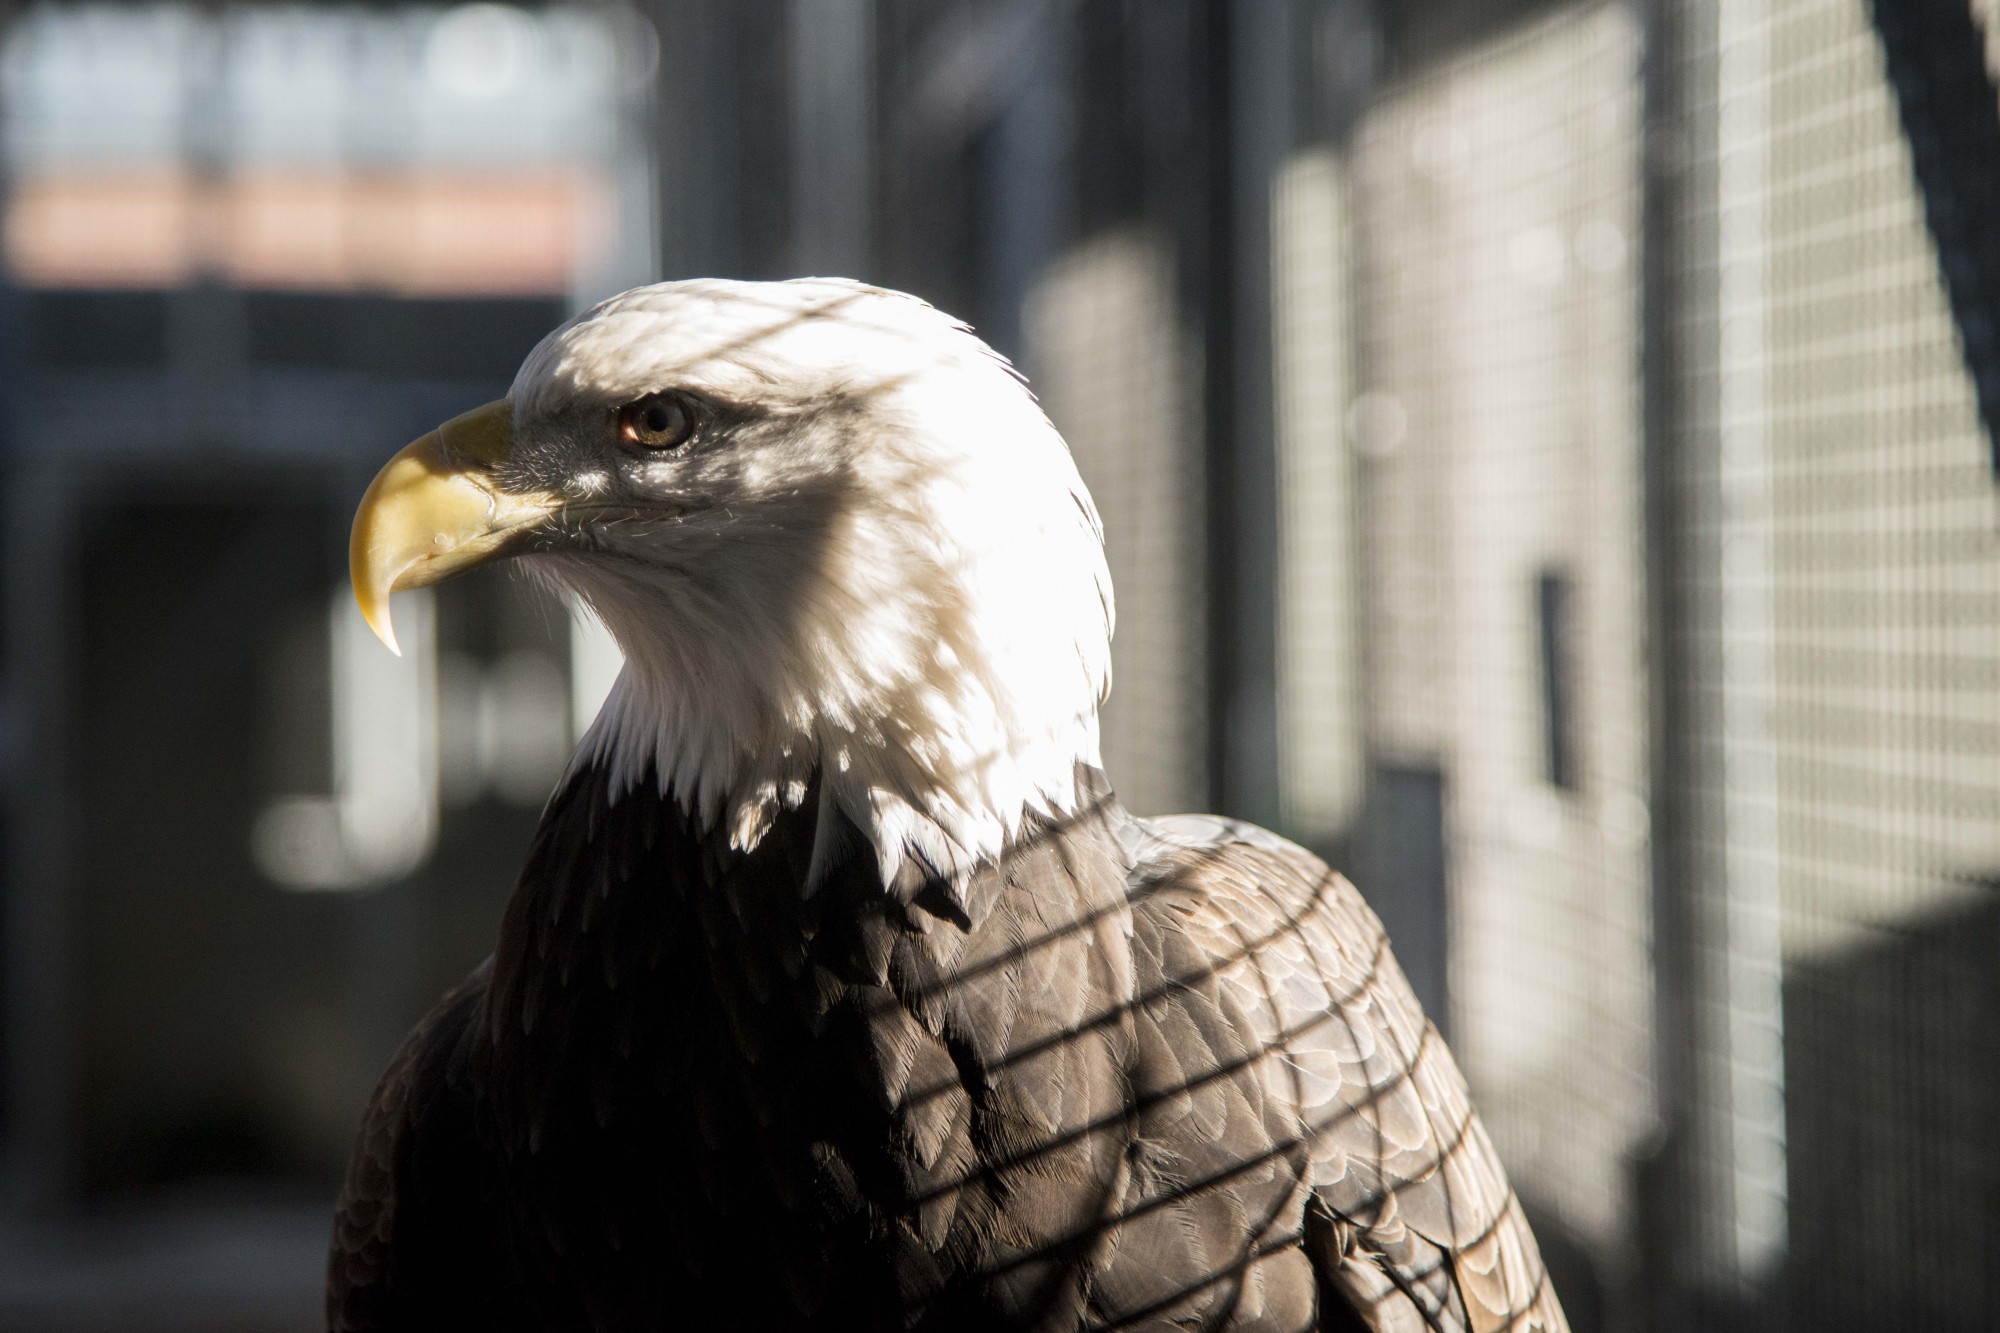 A Bald Eagle at the Gabbert Raptor Center as seen on Tuesday, Dec. 3. Researchers are evaluating the auditory responses in eagles, which are among the most common species of bird killed by wind turbines, as part of an ongoing effort to prevent fatalities caused by collisions. 